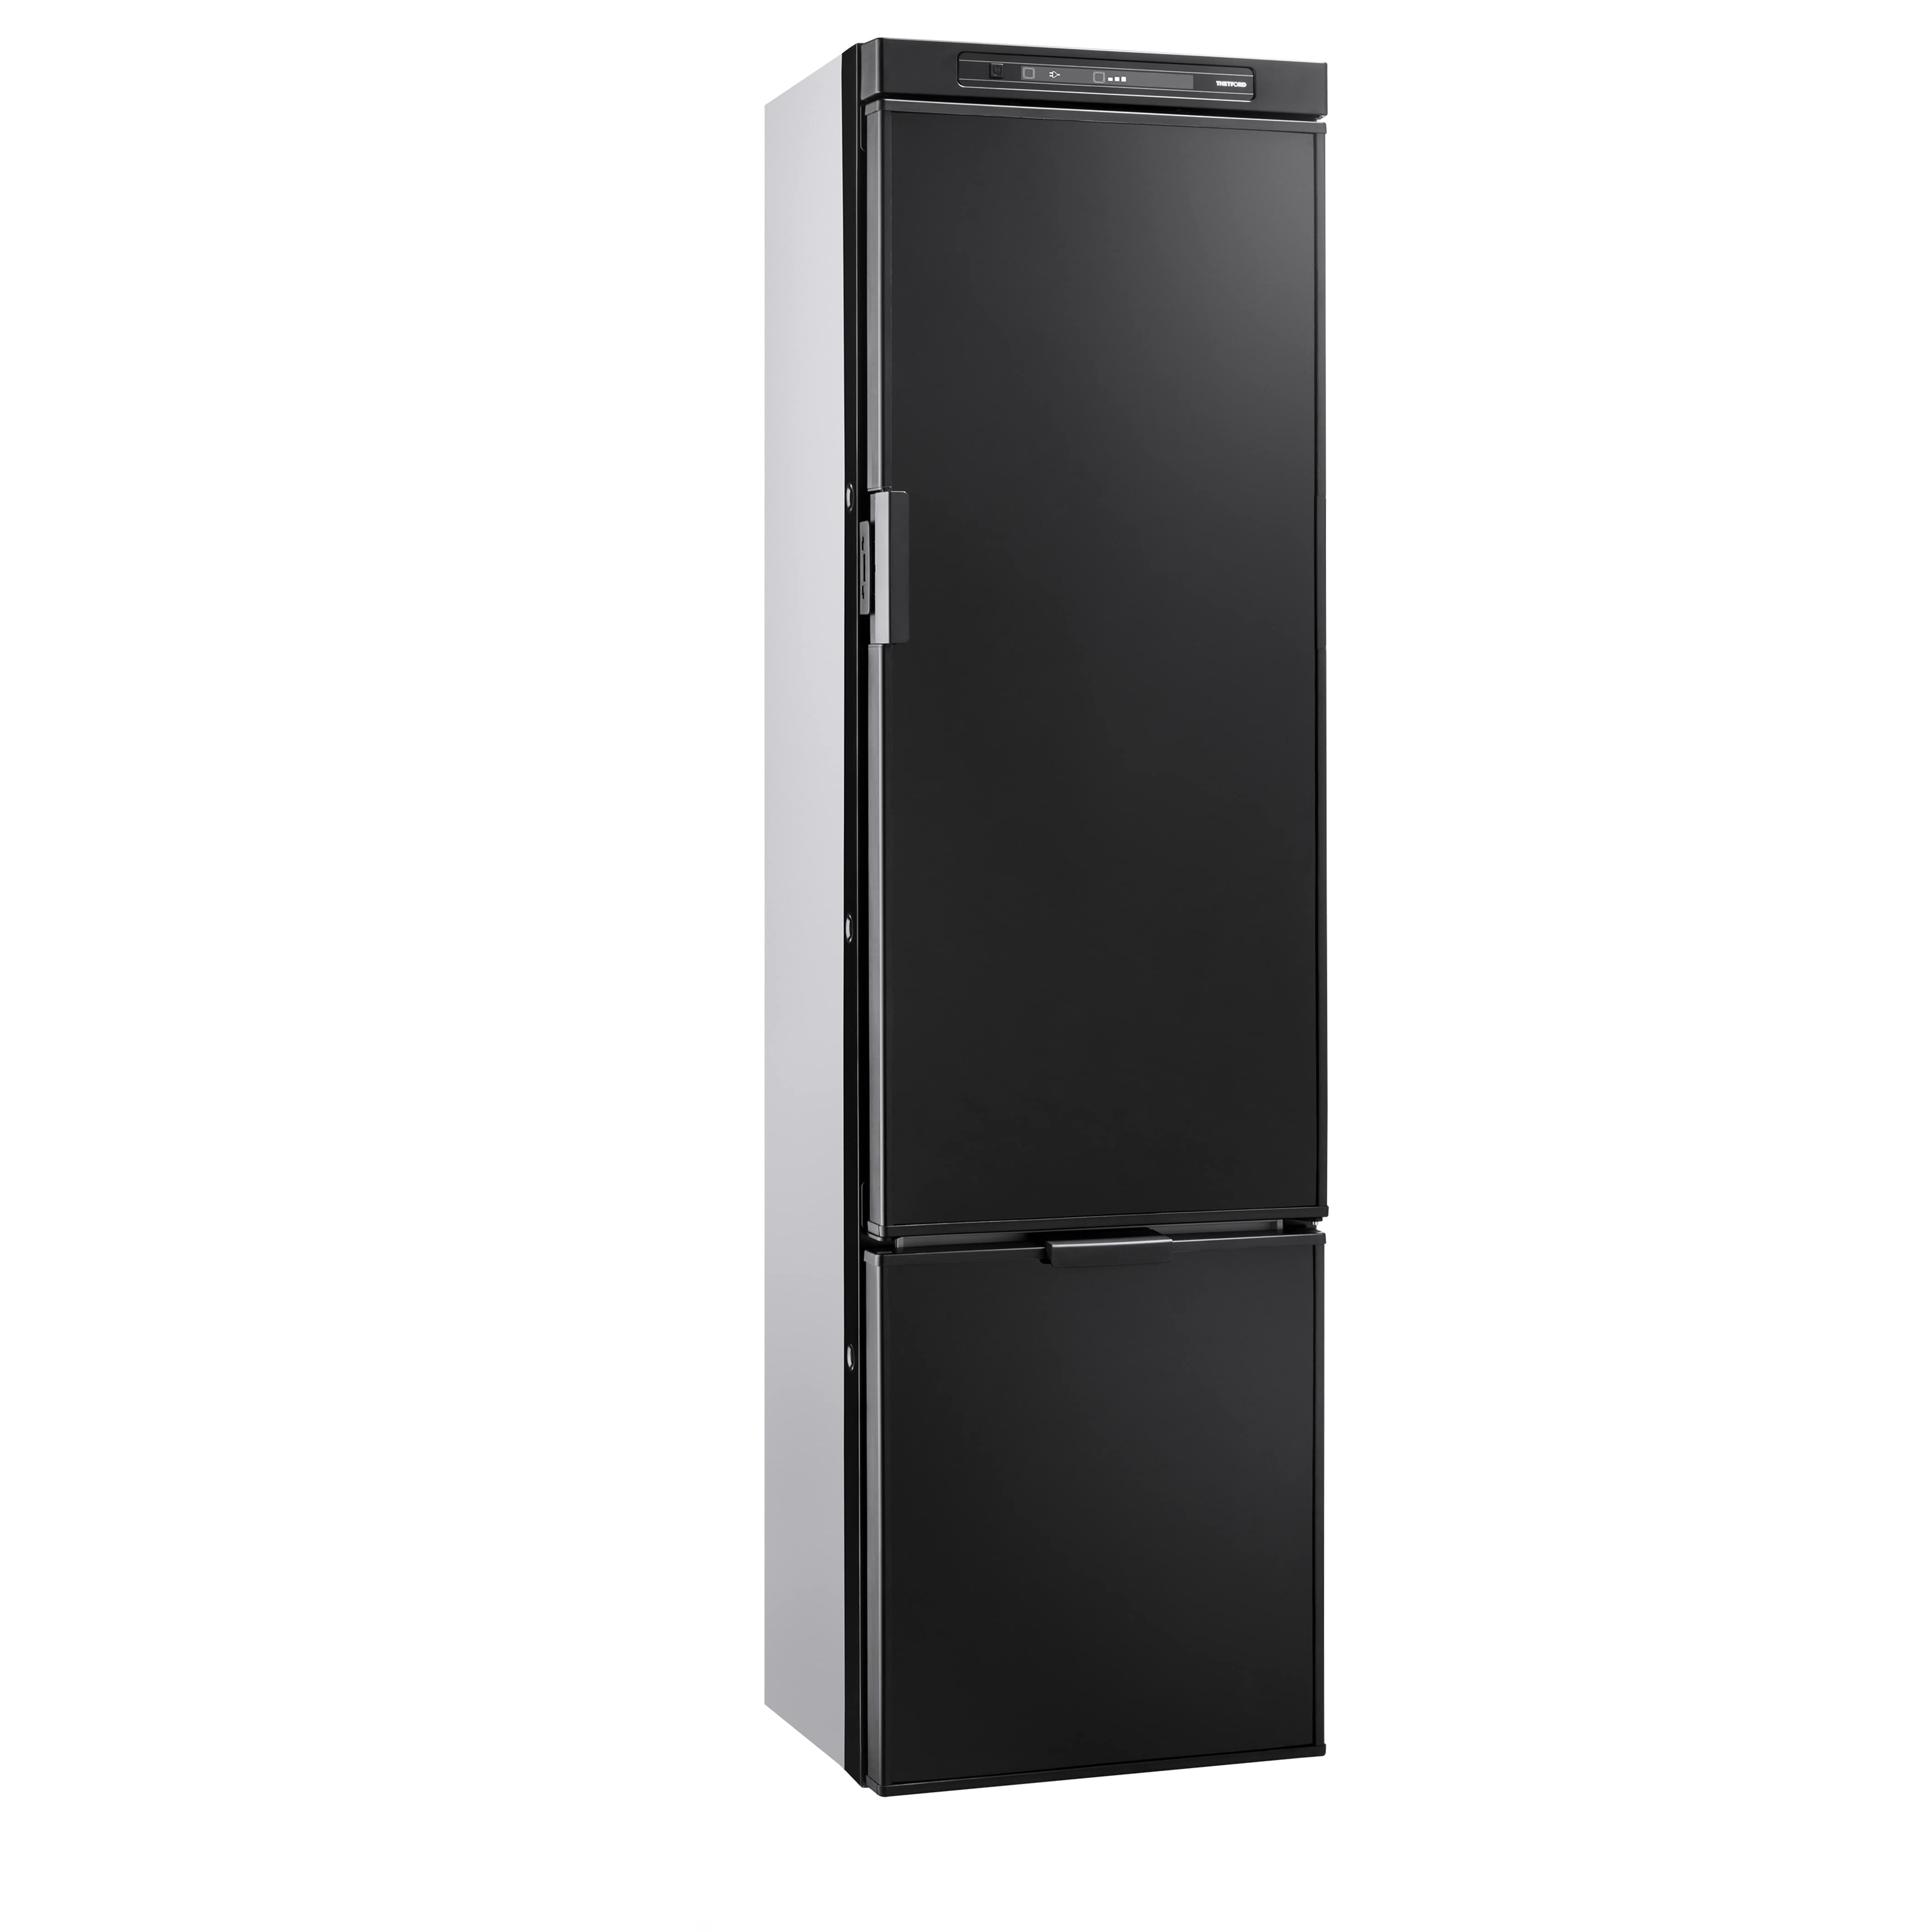 Norcold N3141 5 Cu Ft Of Internal Storage In A Slim Elegant Refrigerator,How To Make A Tequila Sunrise With Cranberry Juice